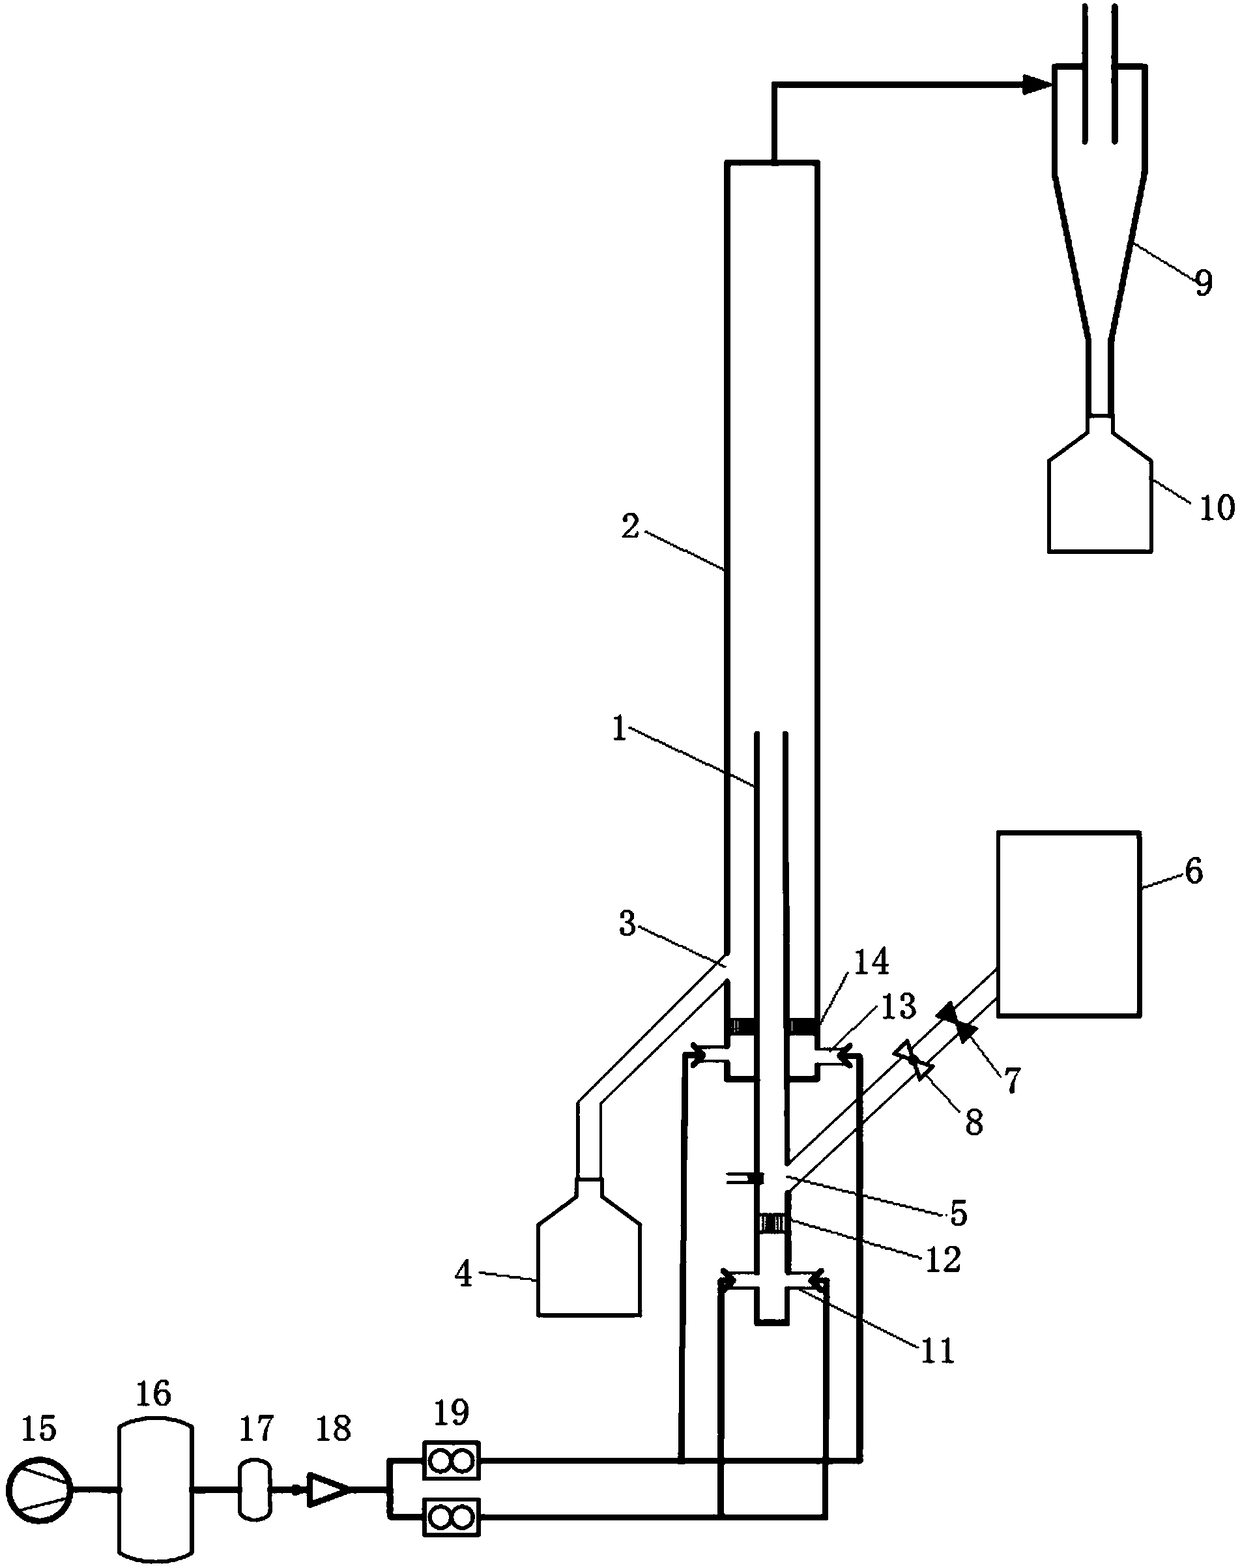 An annular fluidized bed separator for particle mixture and its participating gas-solid reactor system